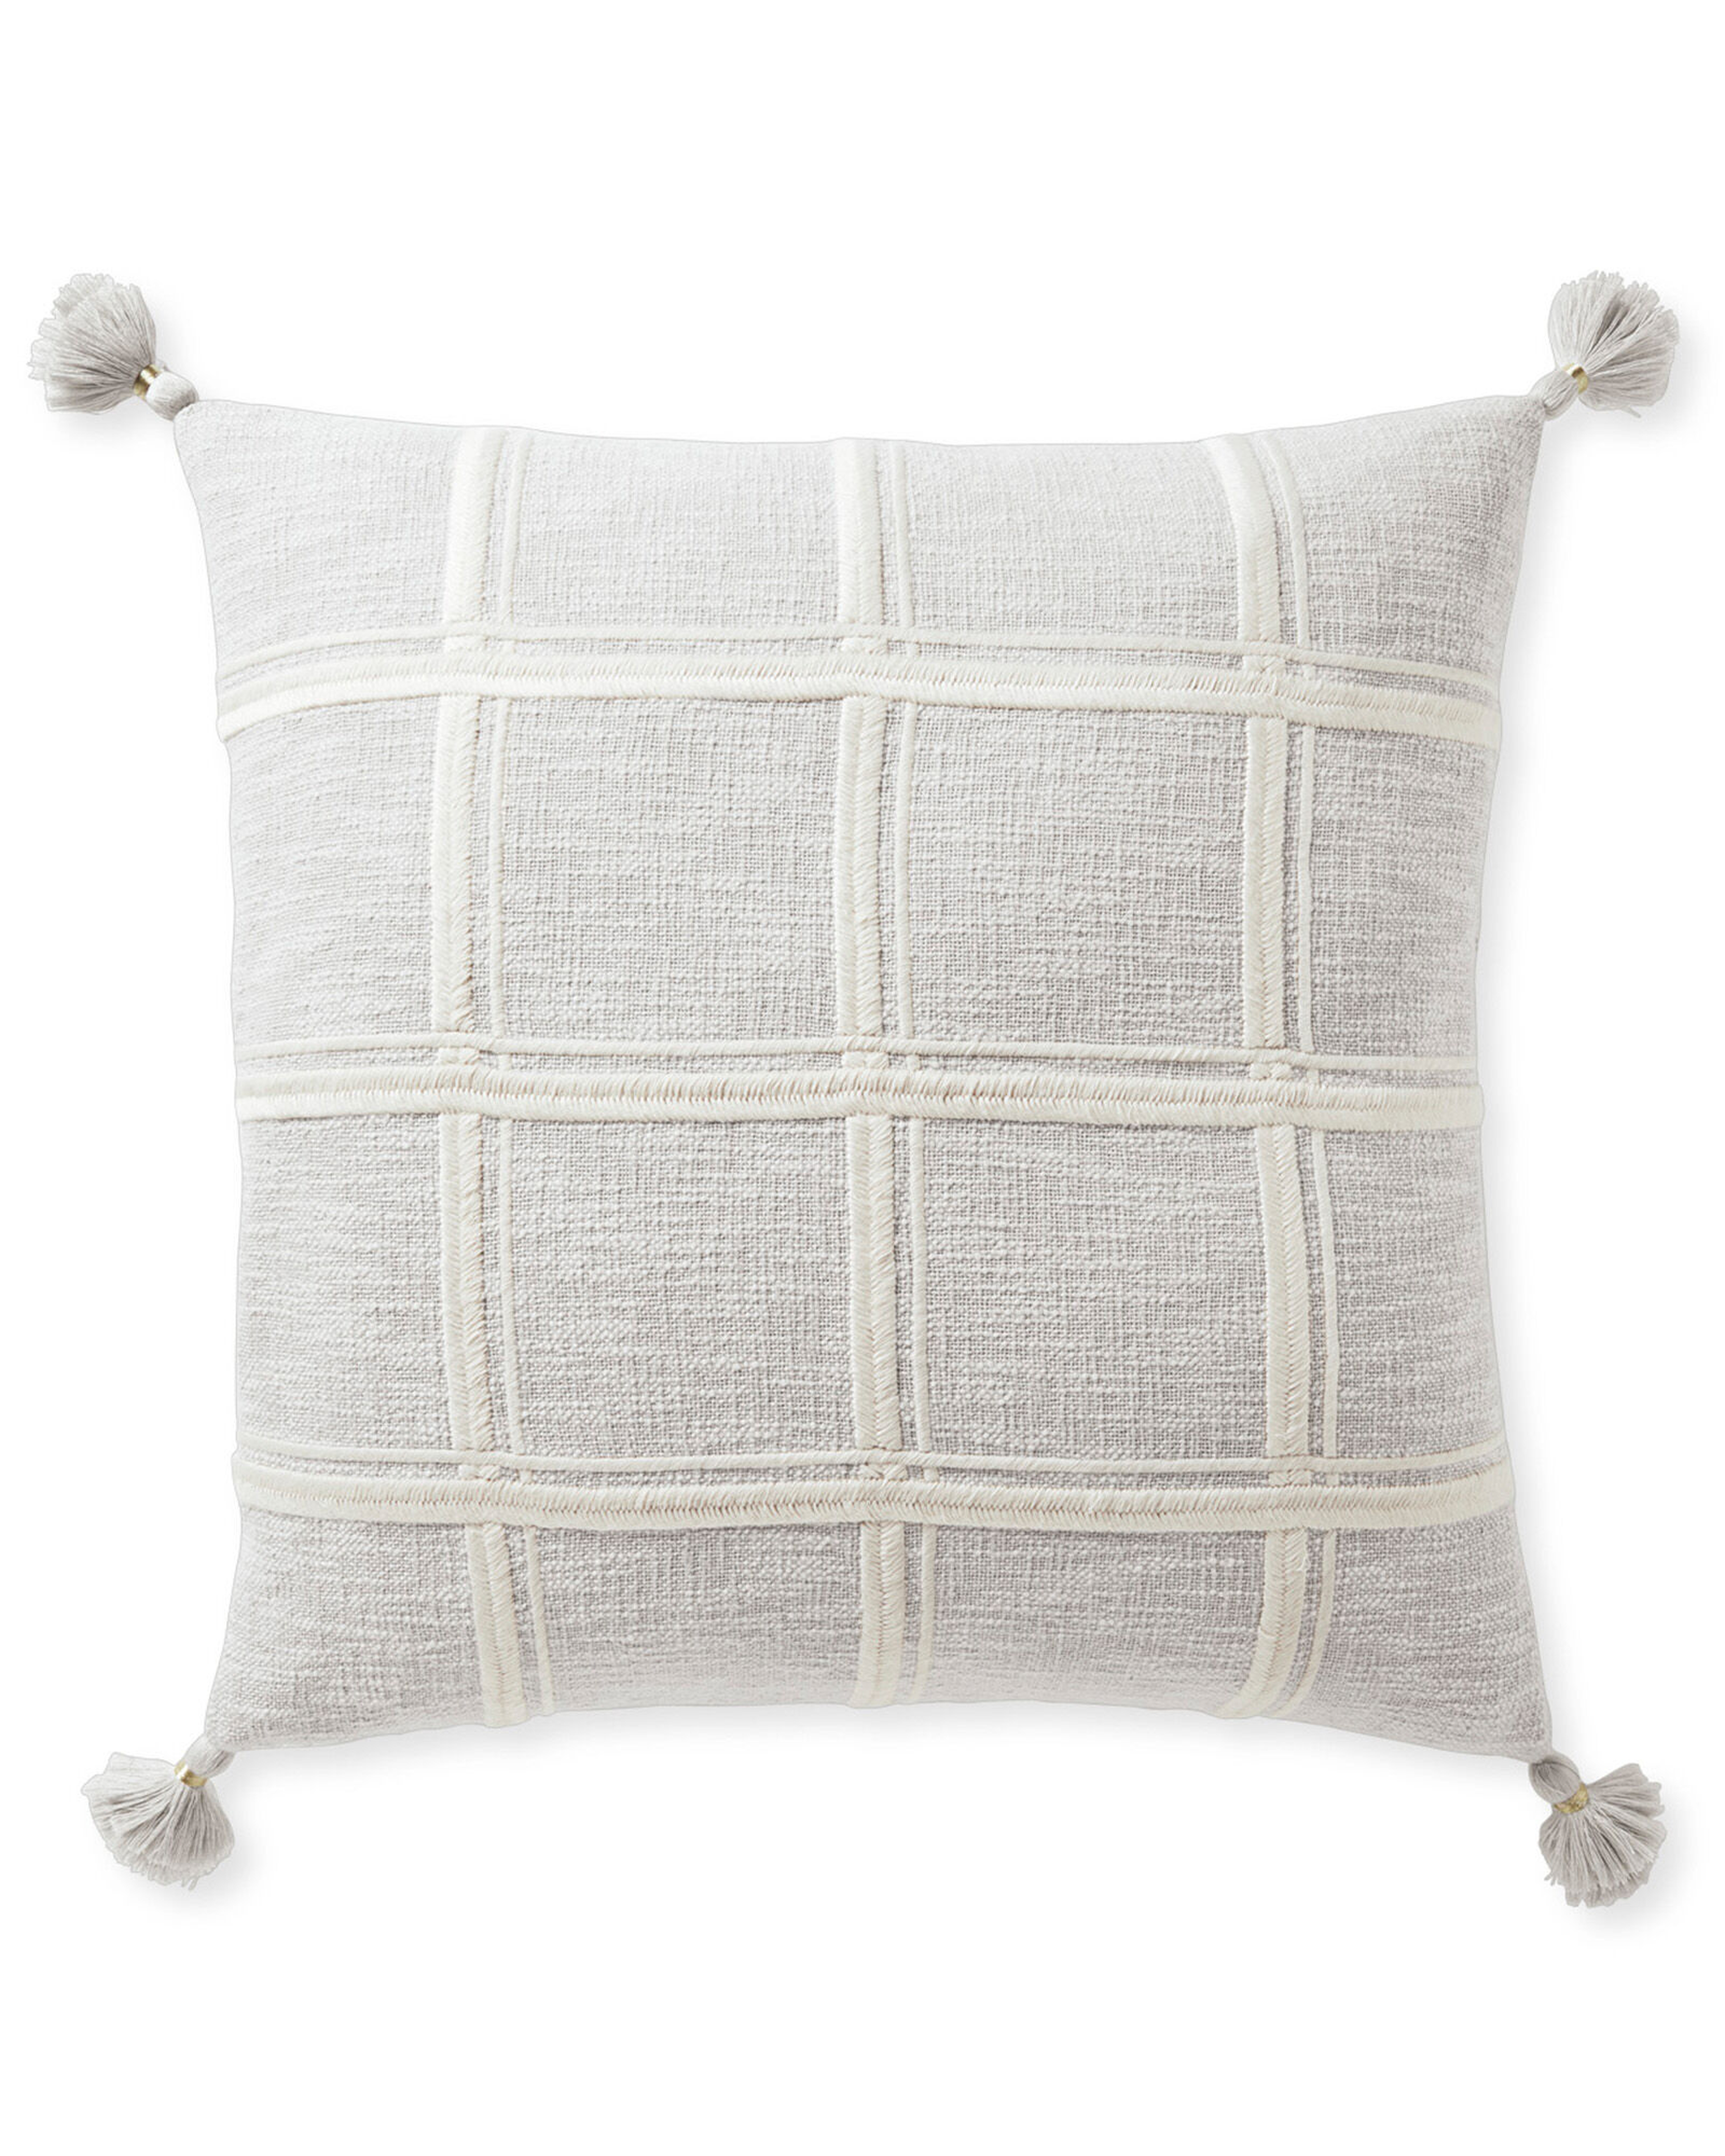 Ashby Pillow Cover - Serena and Lily